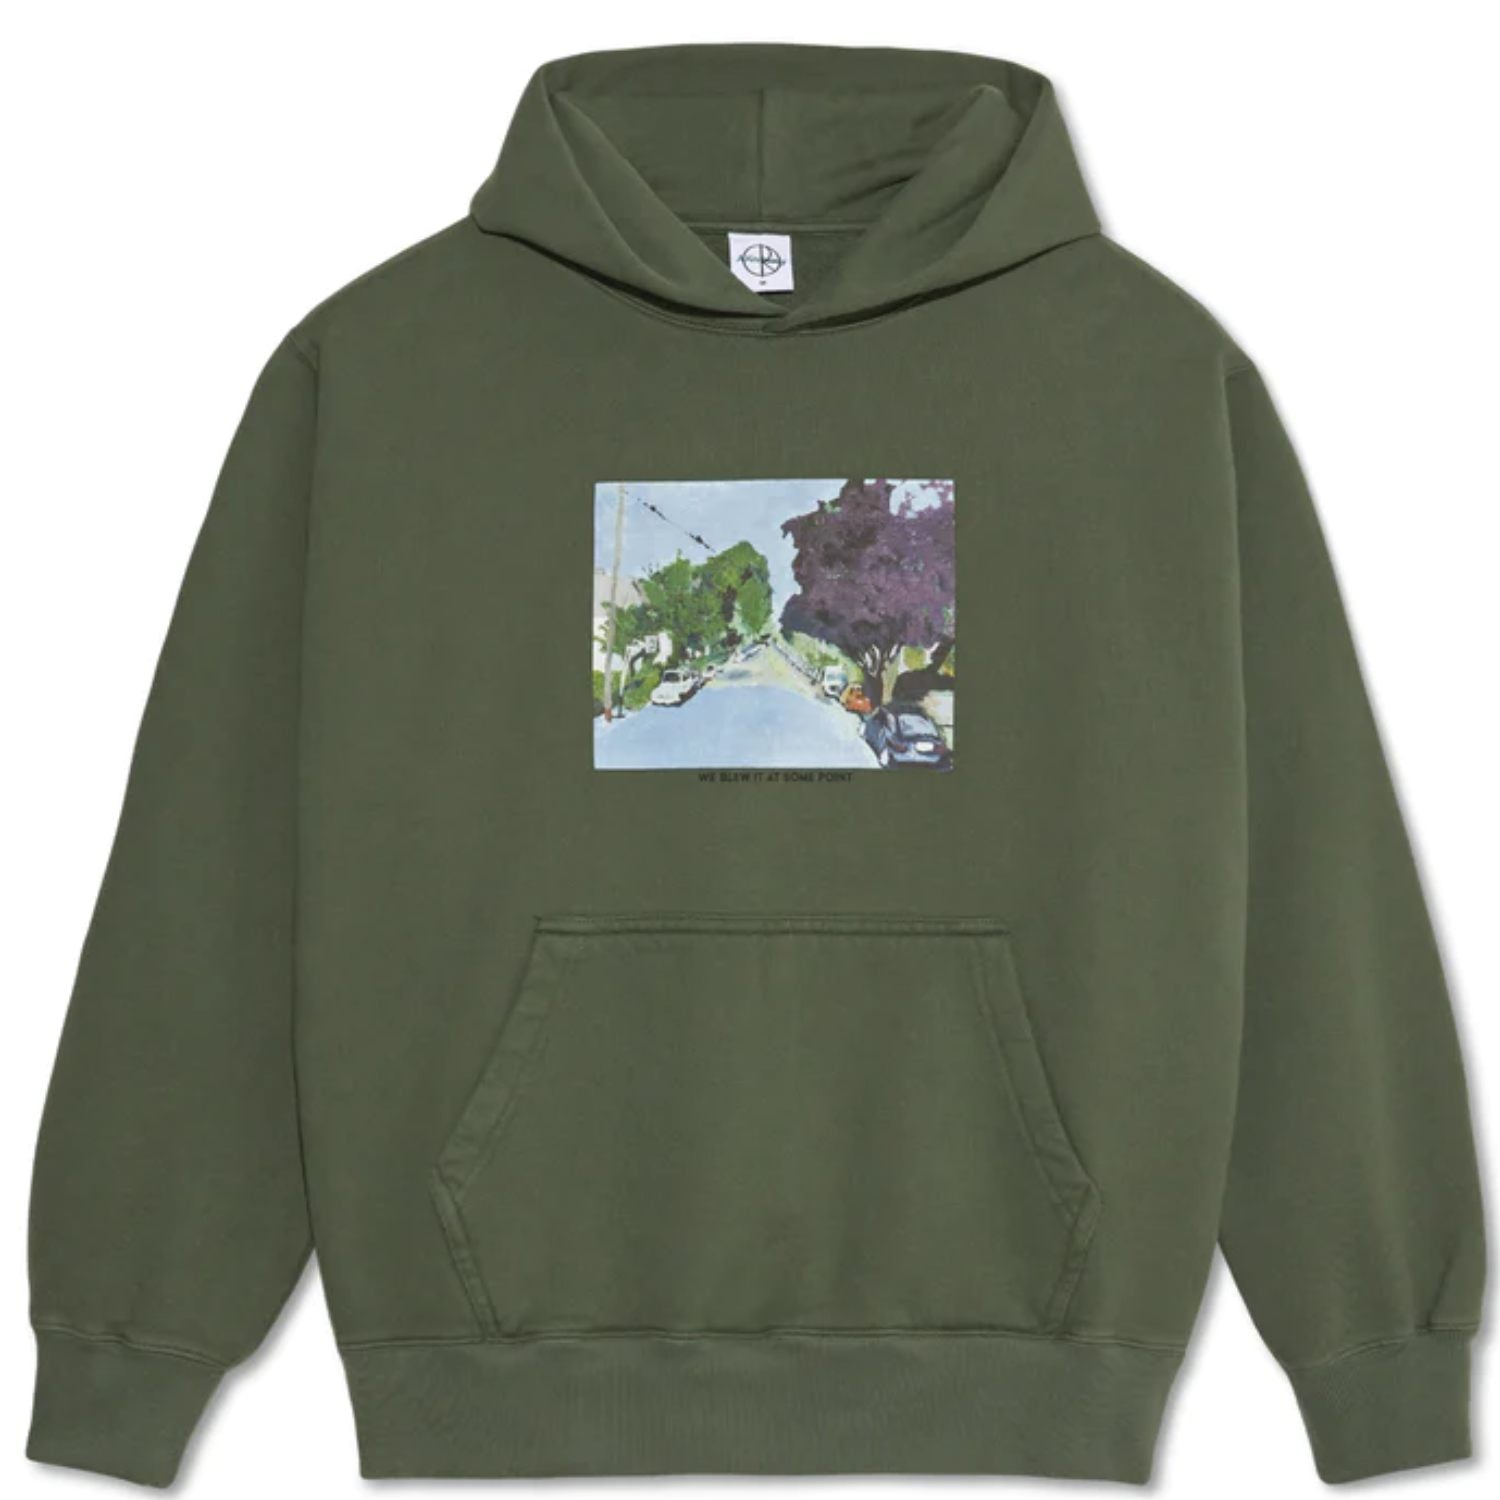 Polar - 'We Blew It At Some Point' Ed Hoodie - Grey Green